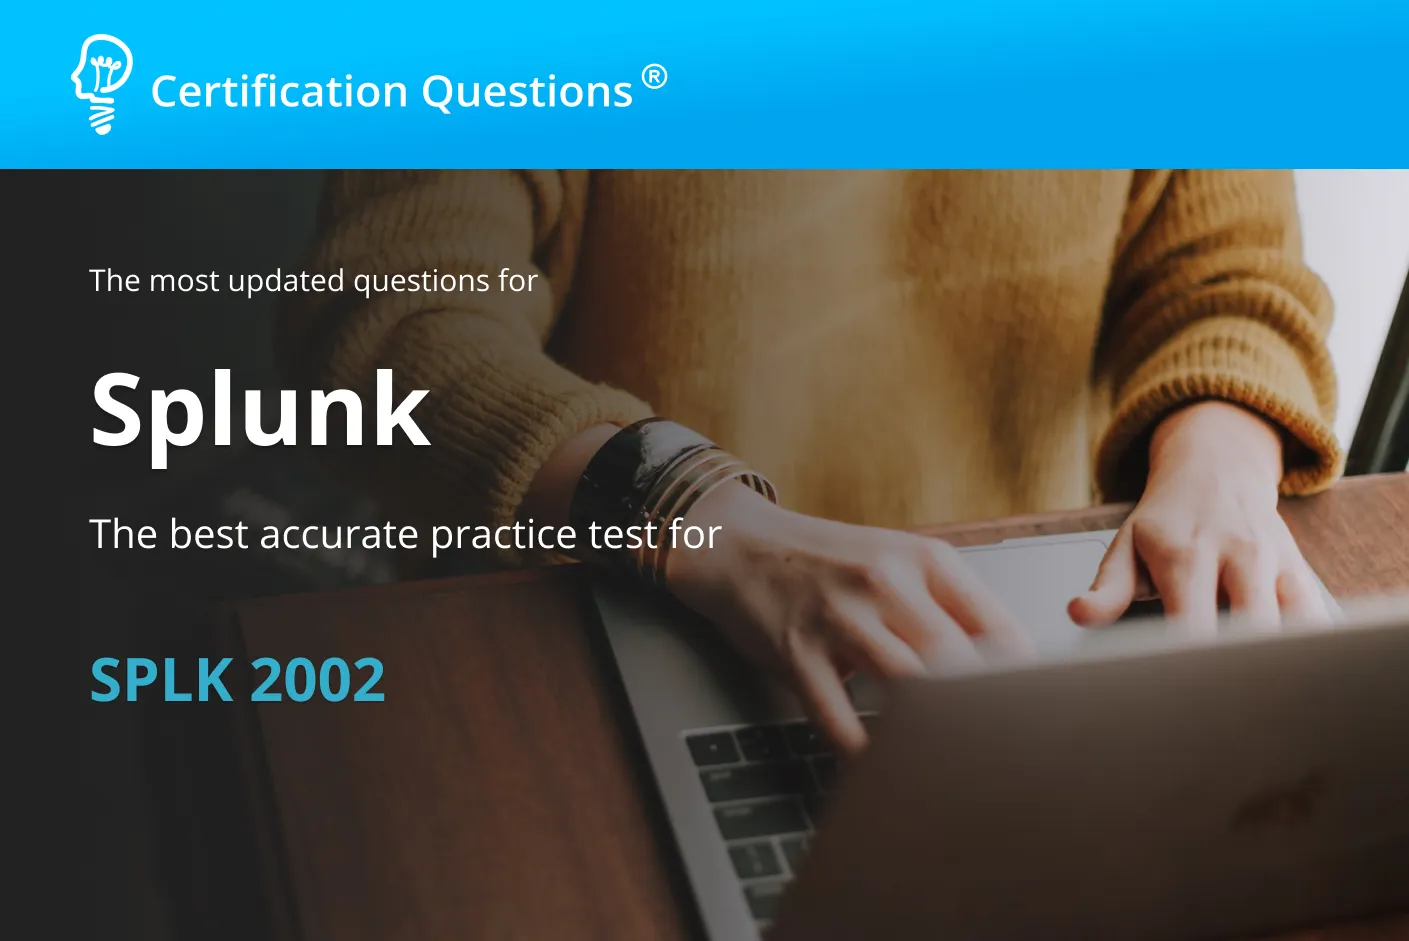 Here is the image about the Splunk enterprise certified architect questions in the USA